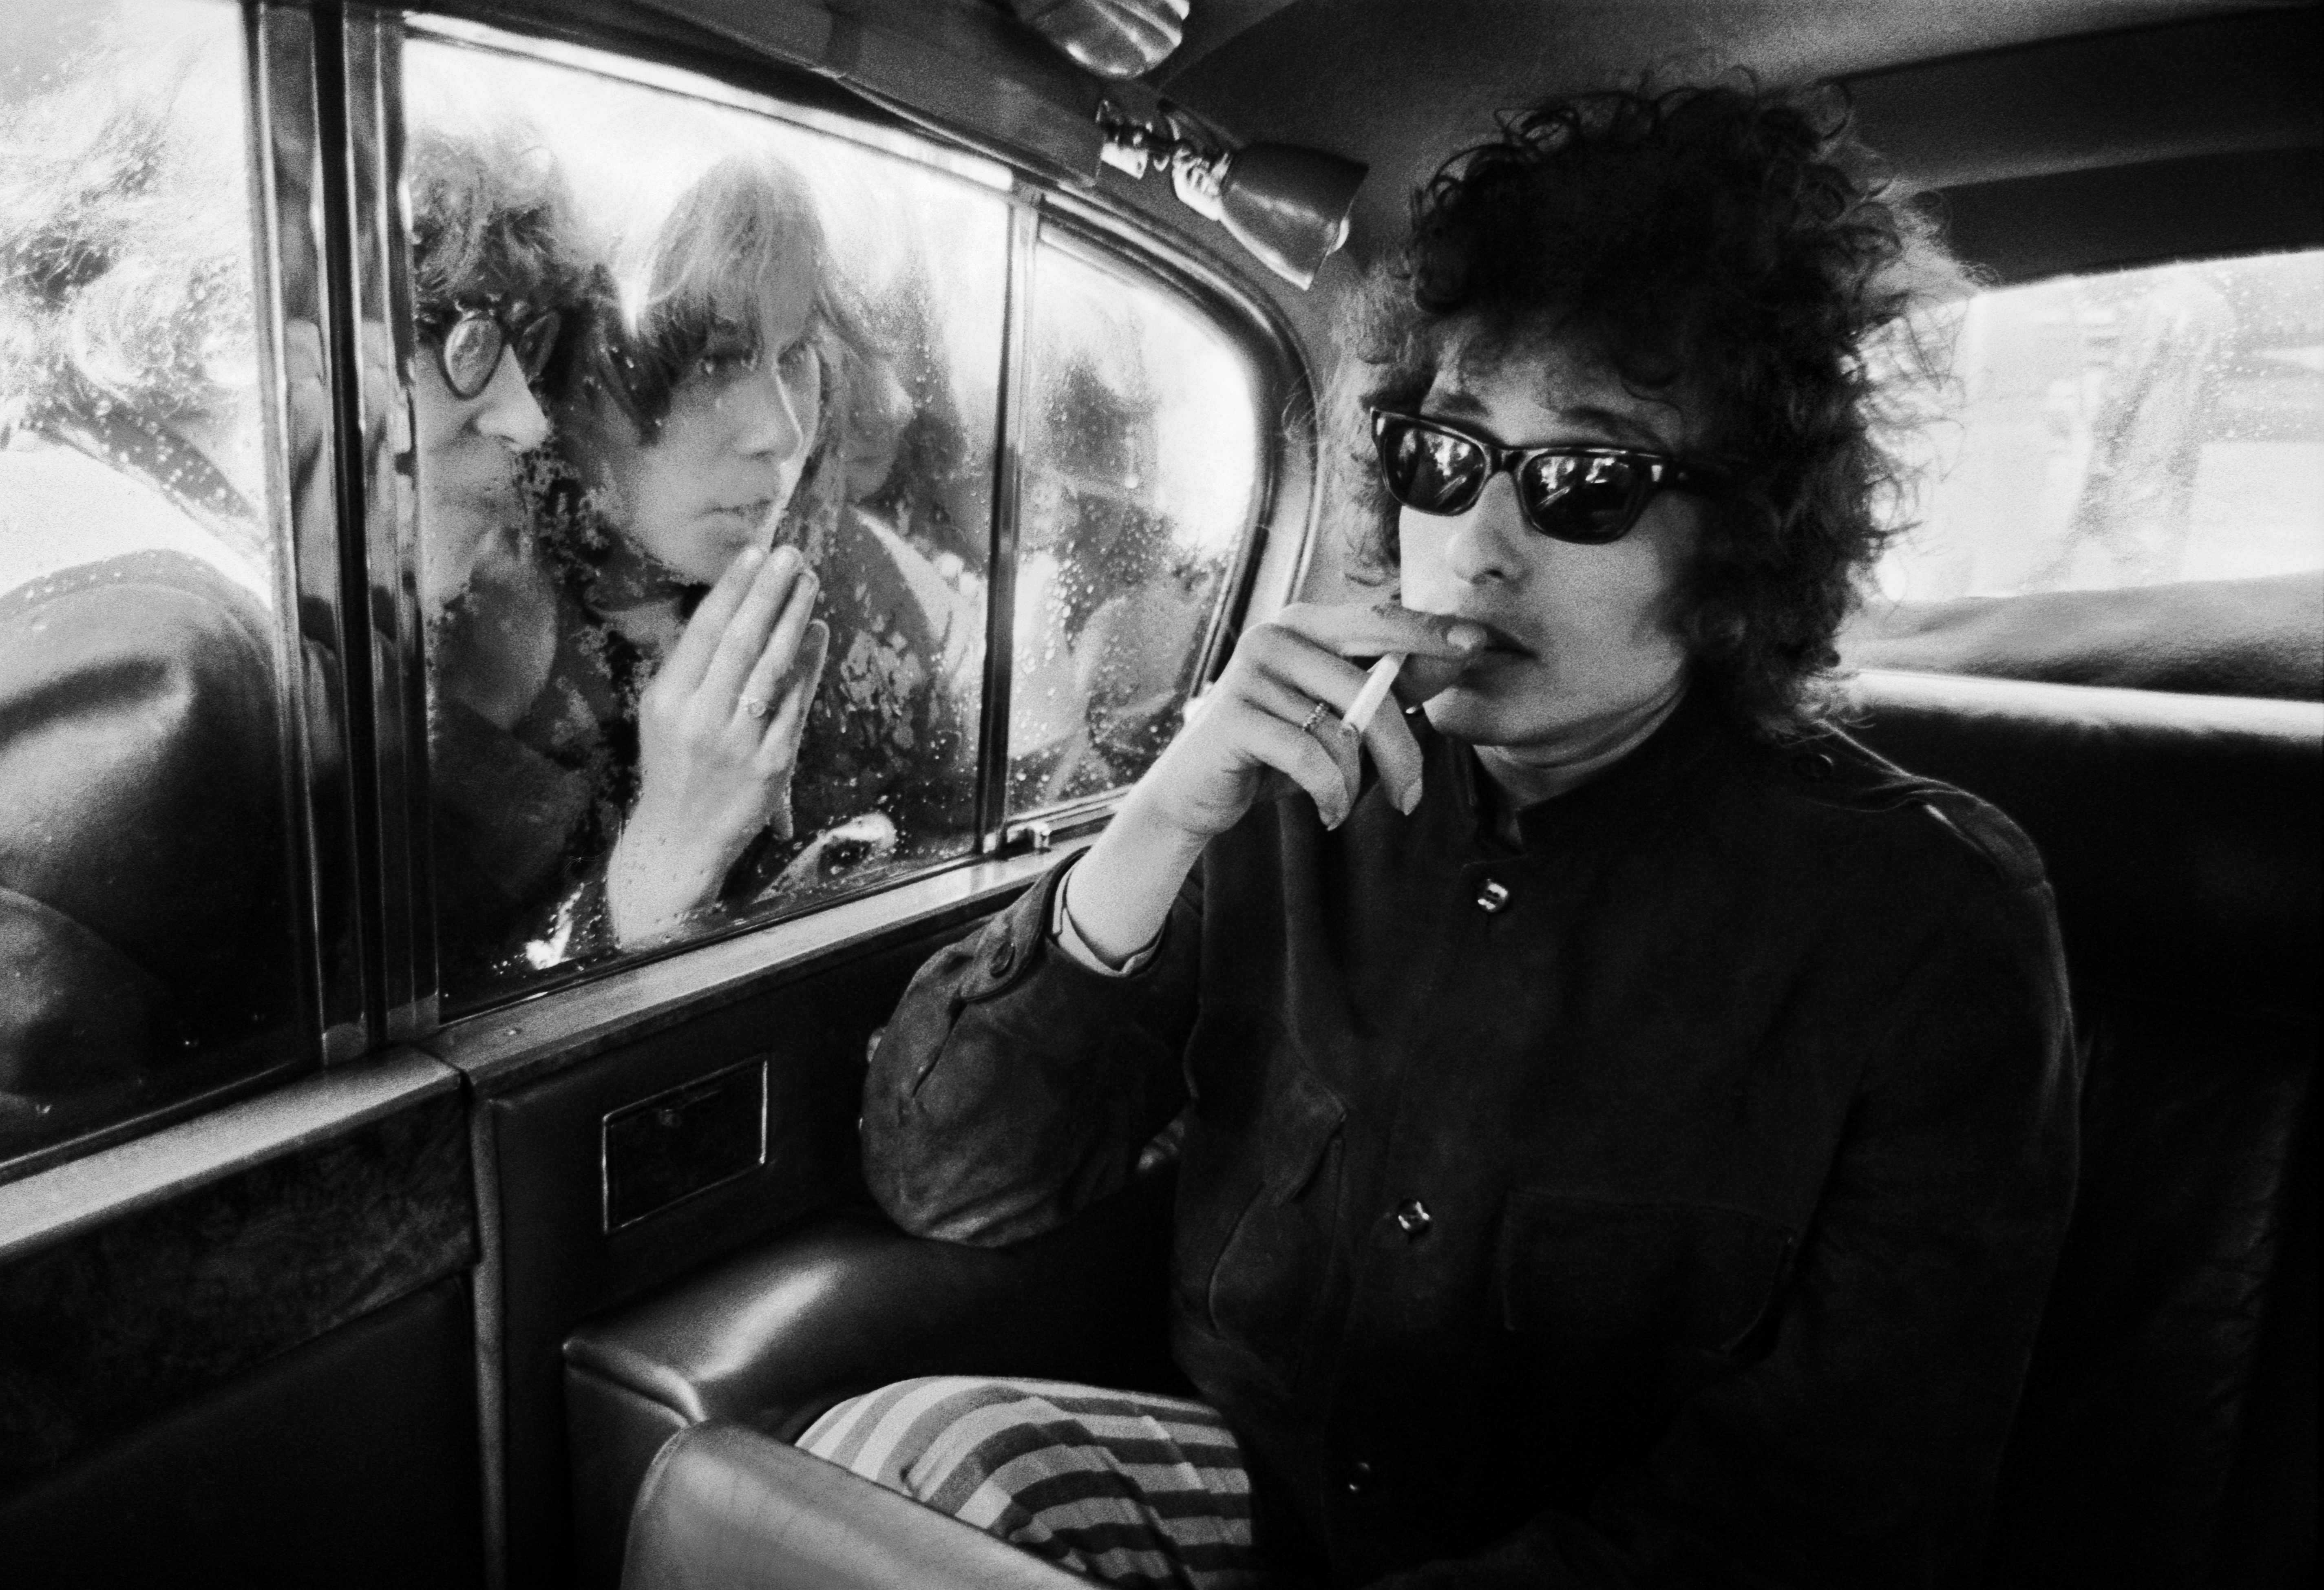 ‘Bob Dylan, Fans Looking in Limo, London, 1966.’ In May of 1966, as photographer Barry Feinstein and Bob Dylan (along with Dylan’s manager, Albert Grossman) rode into London’s Royal Albert Hall, a crush of screaming fans descended on the car. Feinstein captured Dylan keeping his cool. He also shot the portrait that Dylan used on the cover of the seminal 1964 album ‘The Times They Are A-Changin’.’